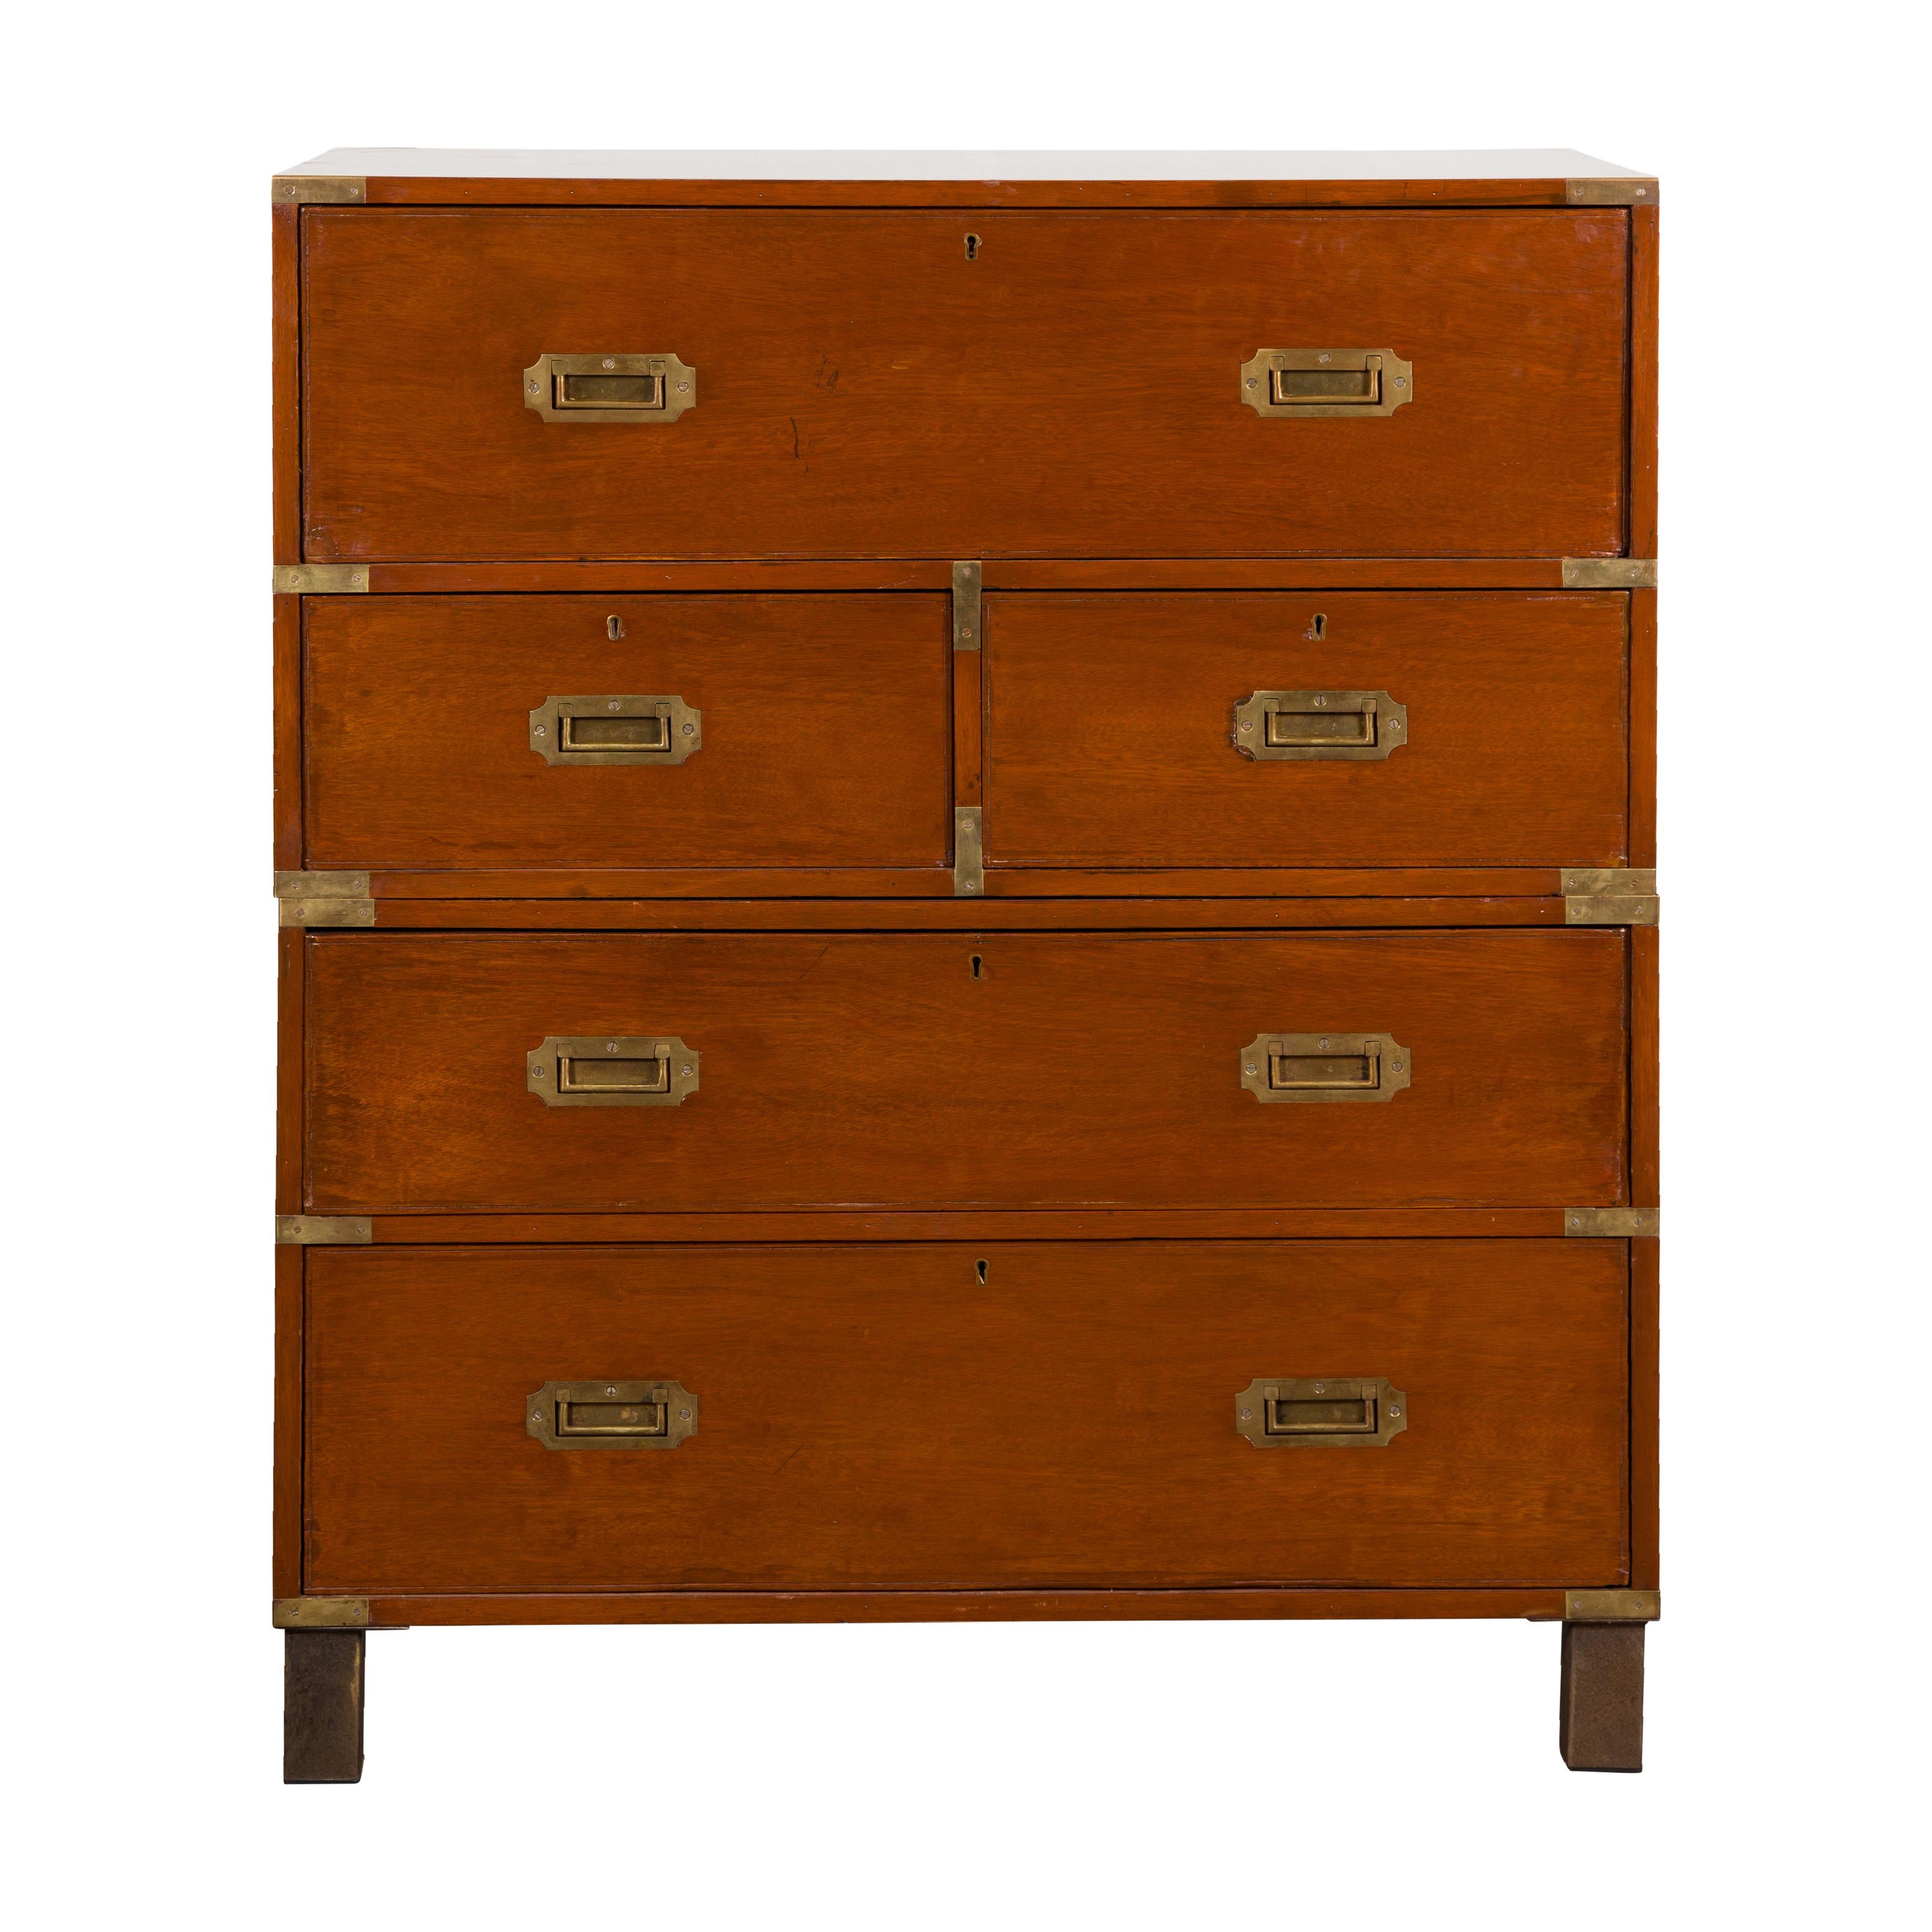 English 19th Century Campaign Chest with Drop Front Desk and Four Drawers For Sale 16